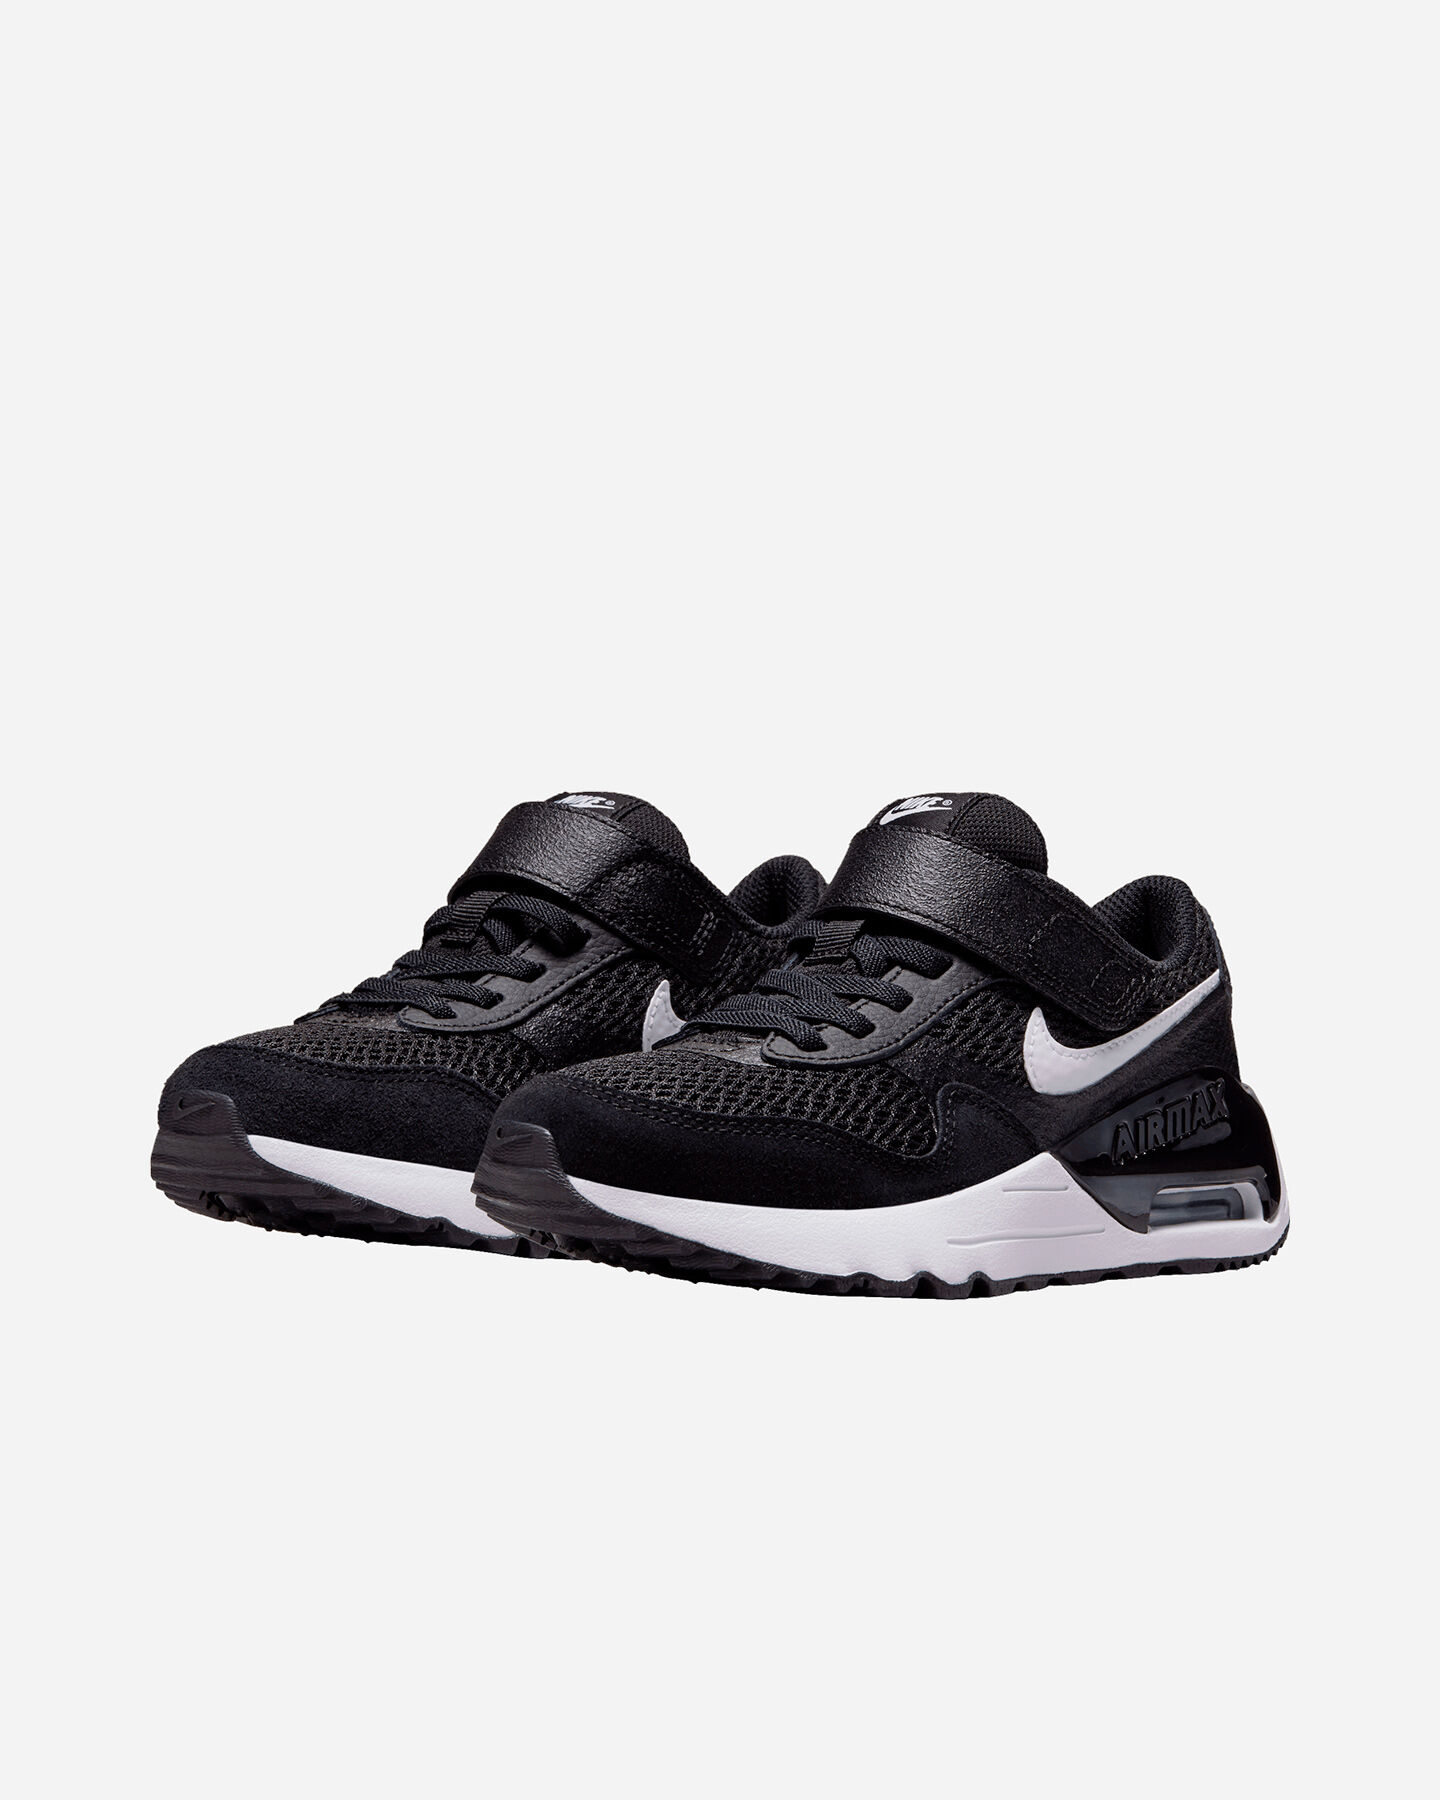  Scarpe sneakers NIKE AIR MAX SYSTEM PS JR S5456473|001|11C scatto 1